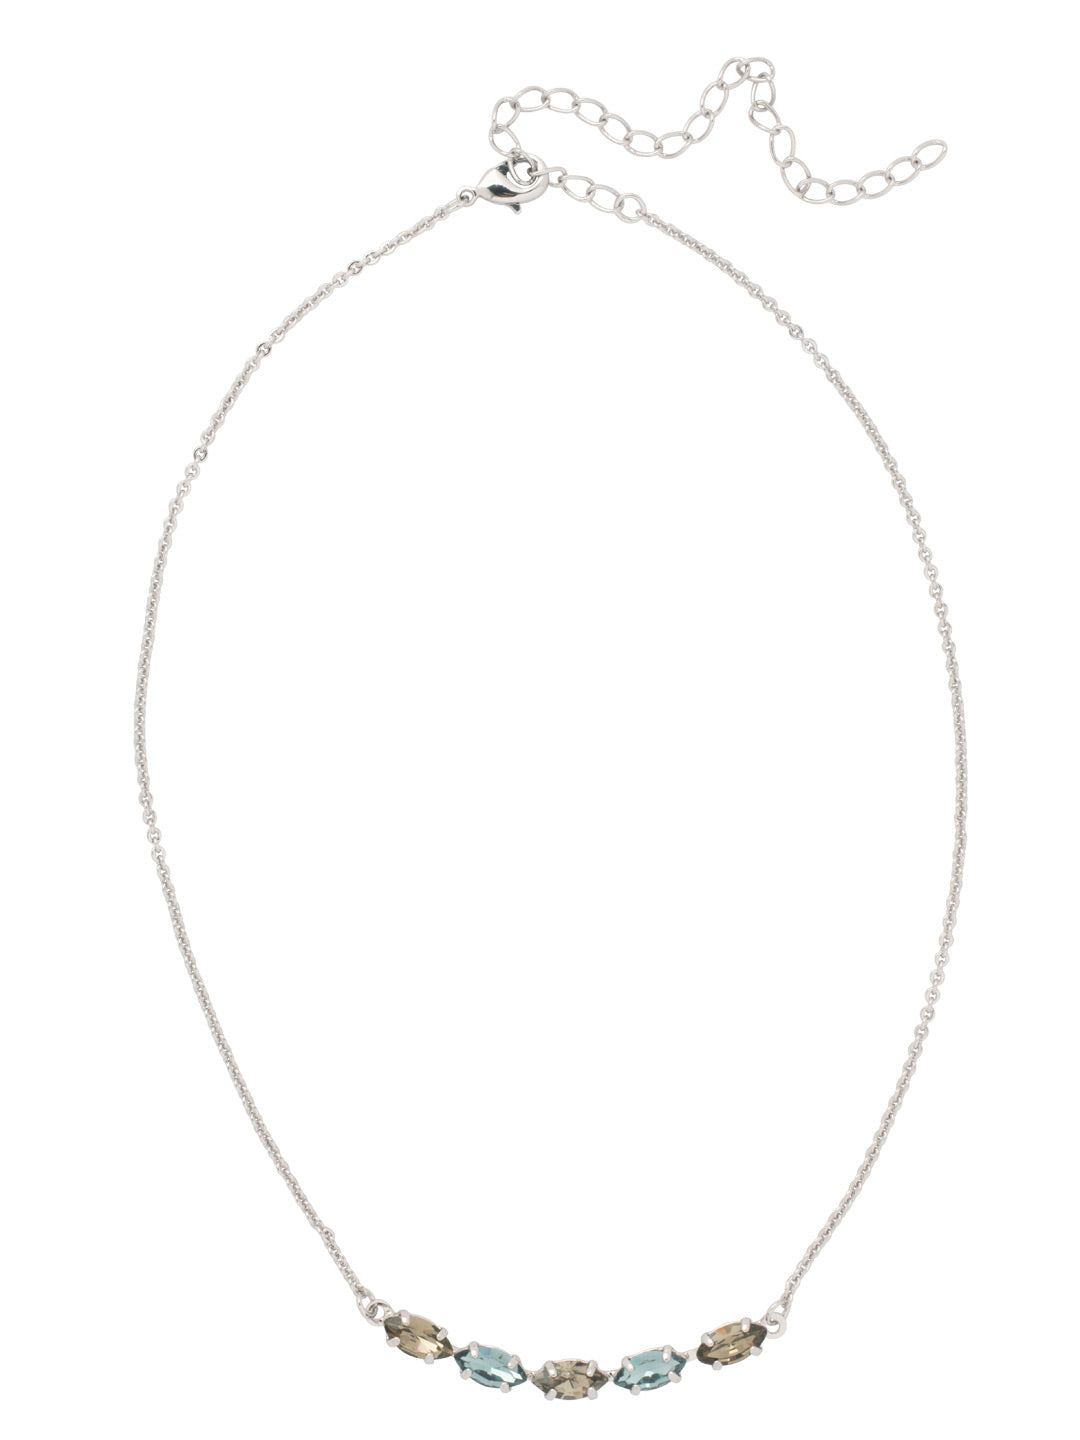 Product Image: Clarissa Repeating Tennis Necklace